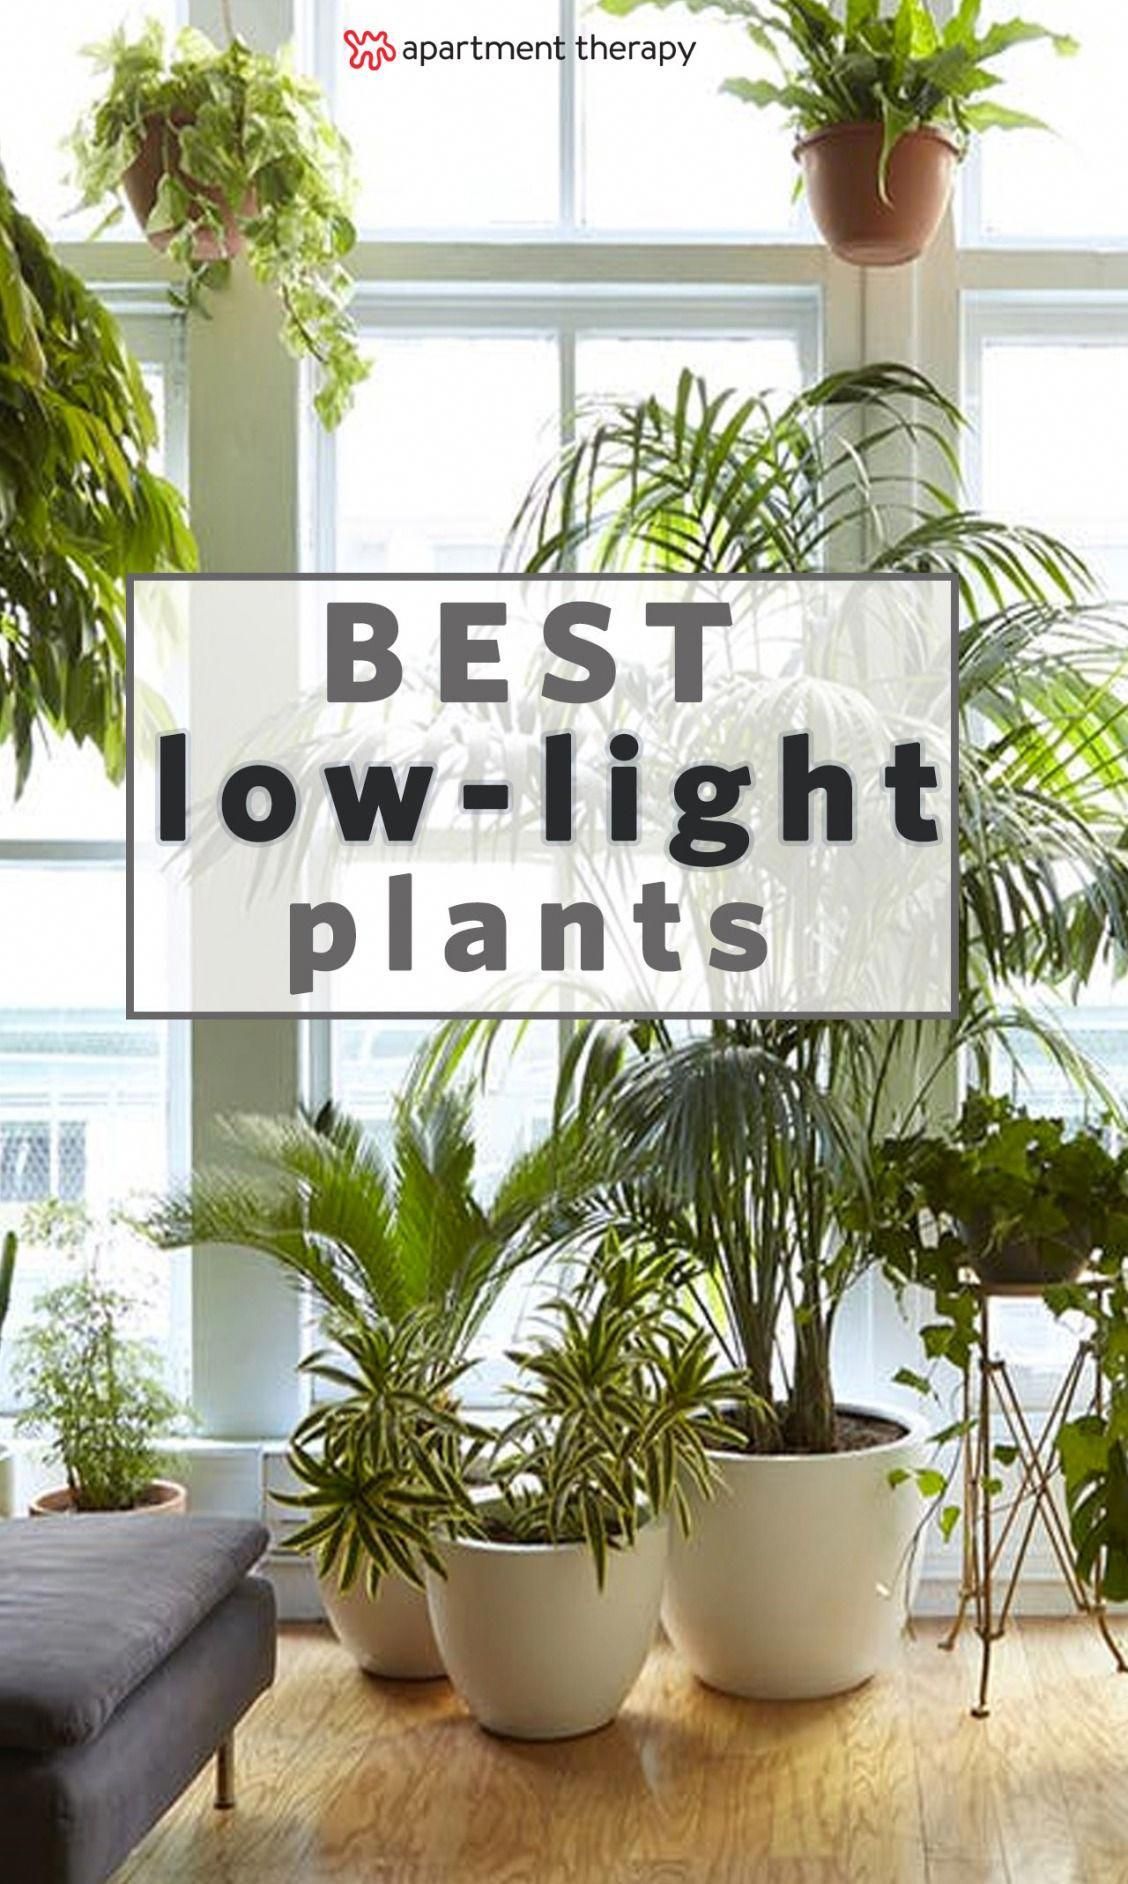 8 Houseplants that Can Survive Urban Apartments, Low Light and Under-Watering | choosing the right plant for your plant-care style and your specific home are two of the most important factors for keeping a houseplant alive. Based on the conditions of your home, along with your aesthetic preferences, you can find your best match. #Houseplants -   21 home garden houseplant
 ideas